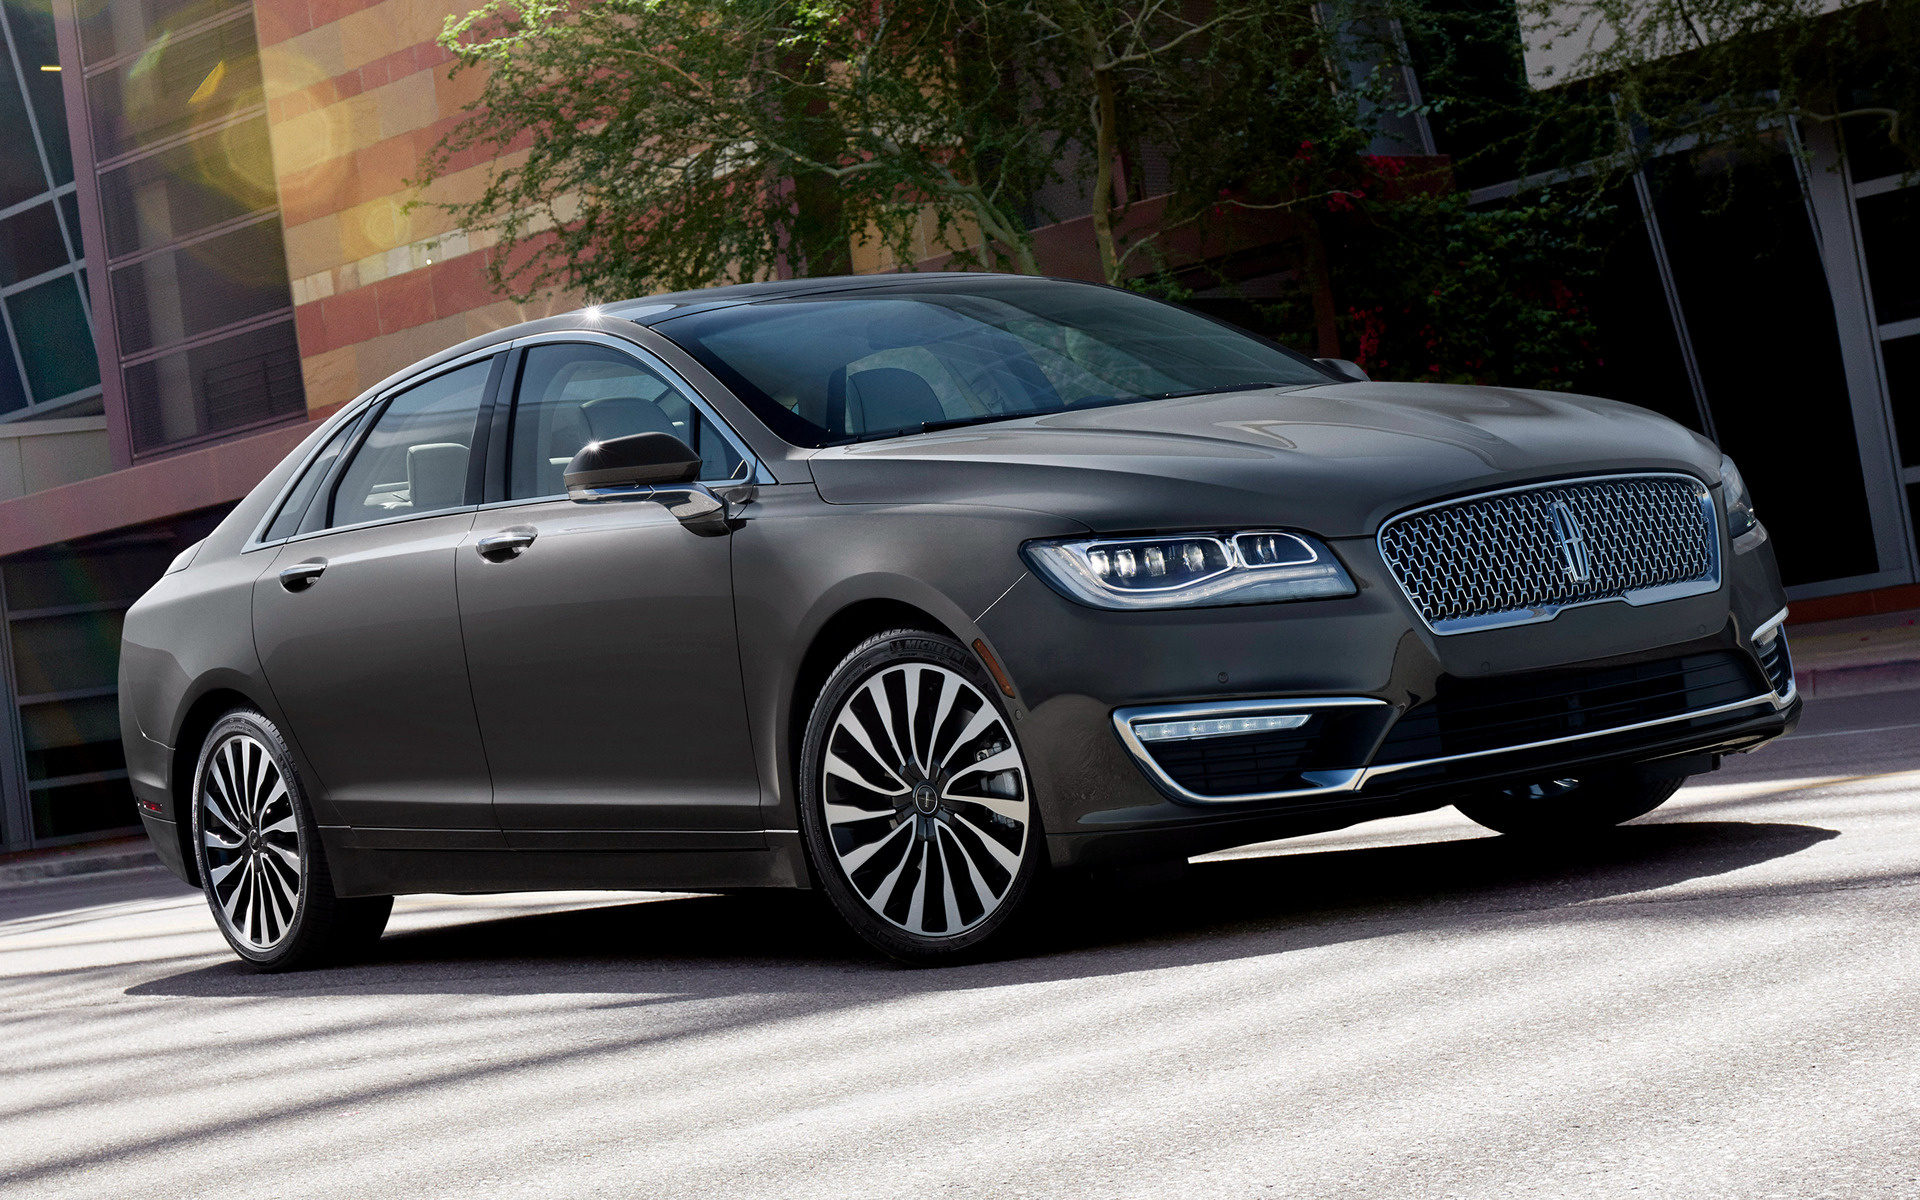 Lincoln MKZ, HD images, Car Pixel, Sophisticated style, 1920x1200 HD Desktop